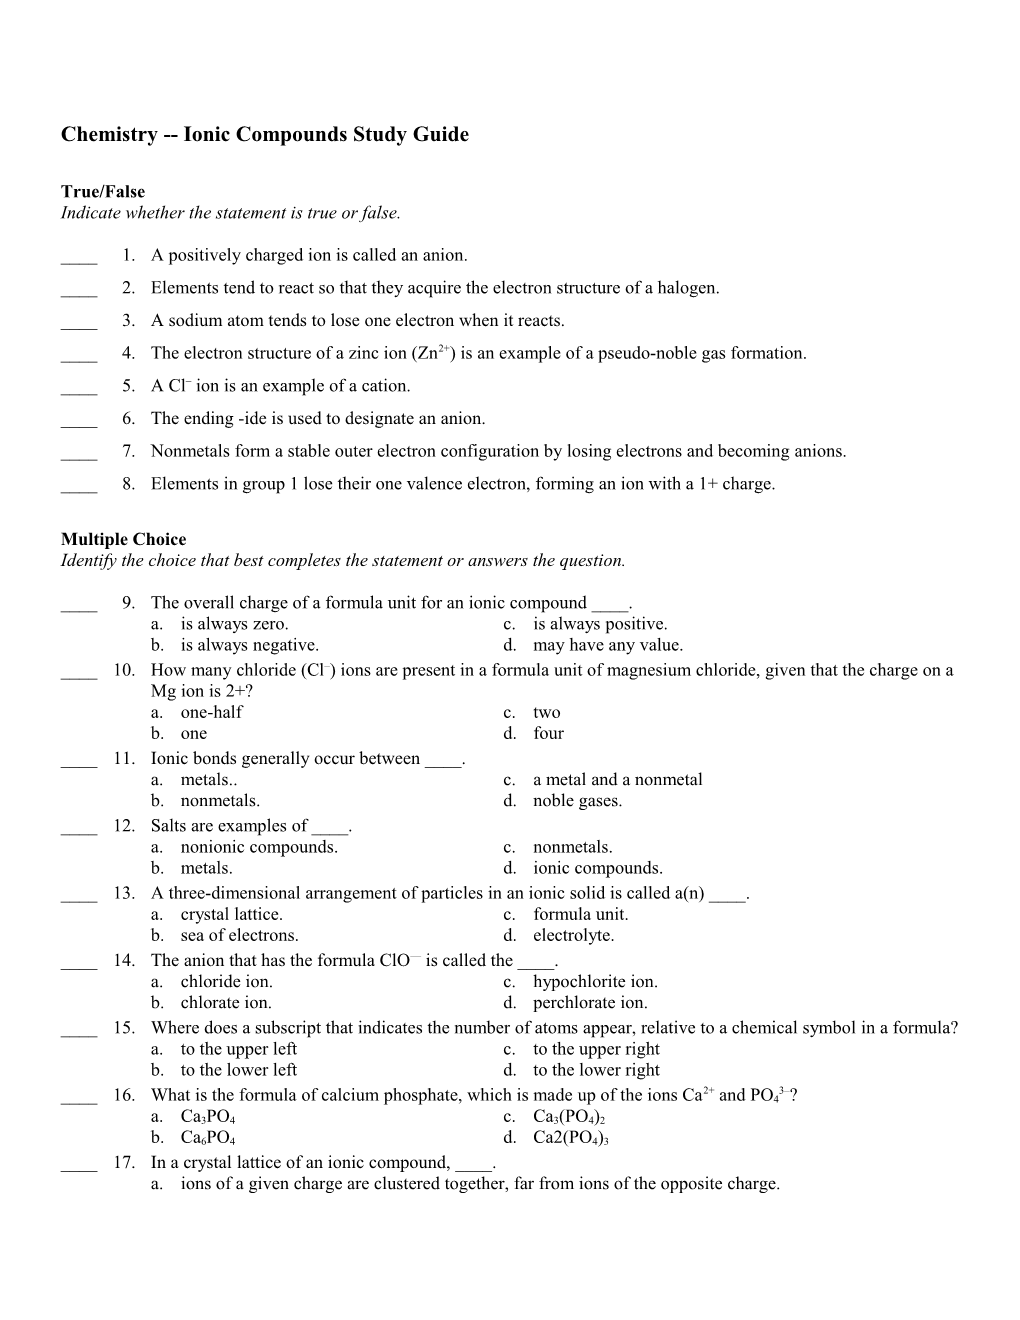 Chemistry Ionic Compounds Study Guide